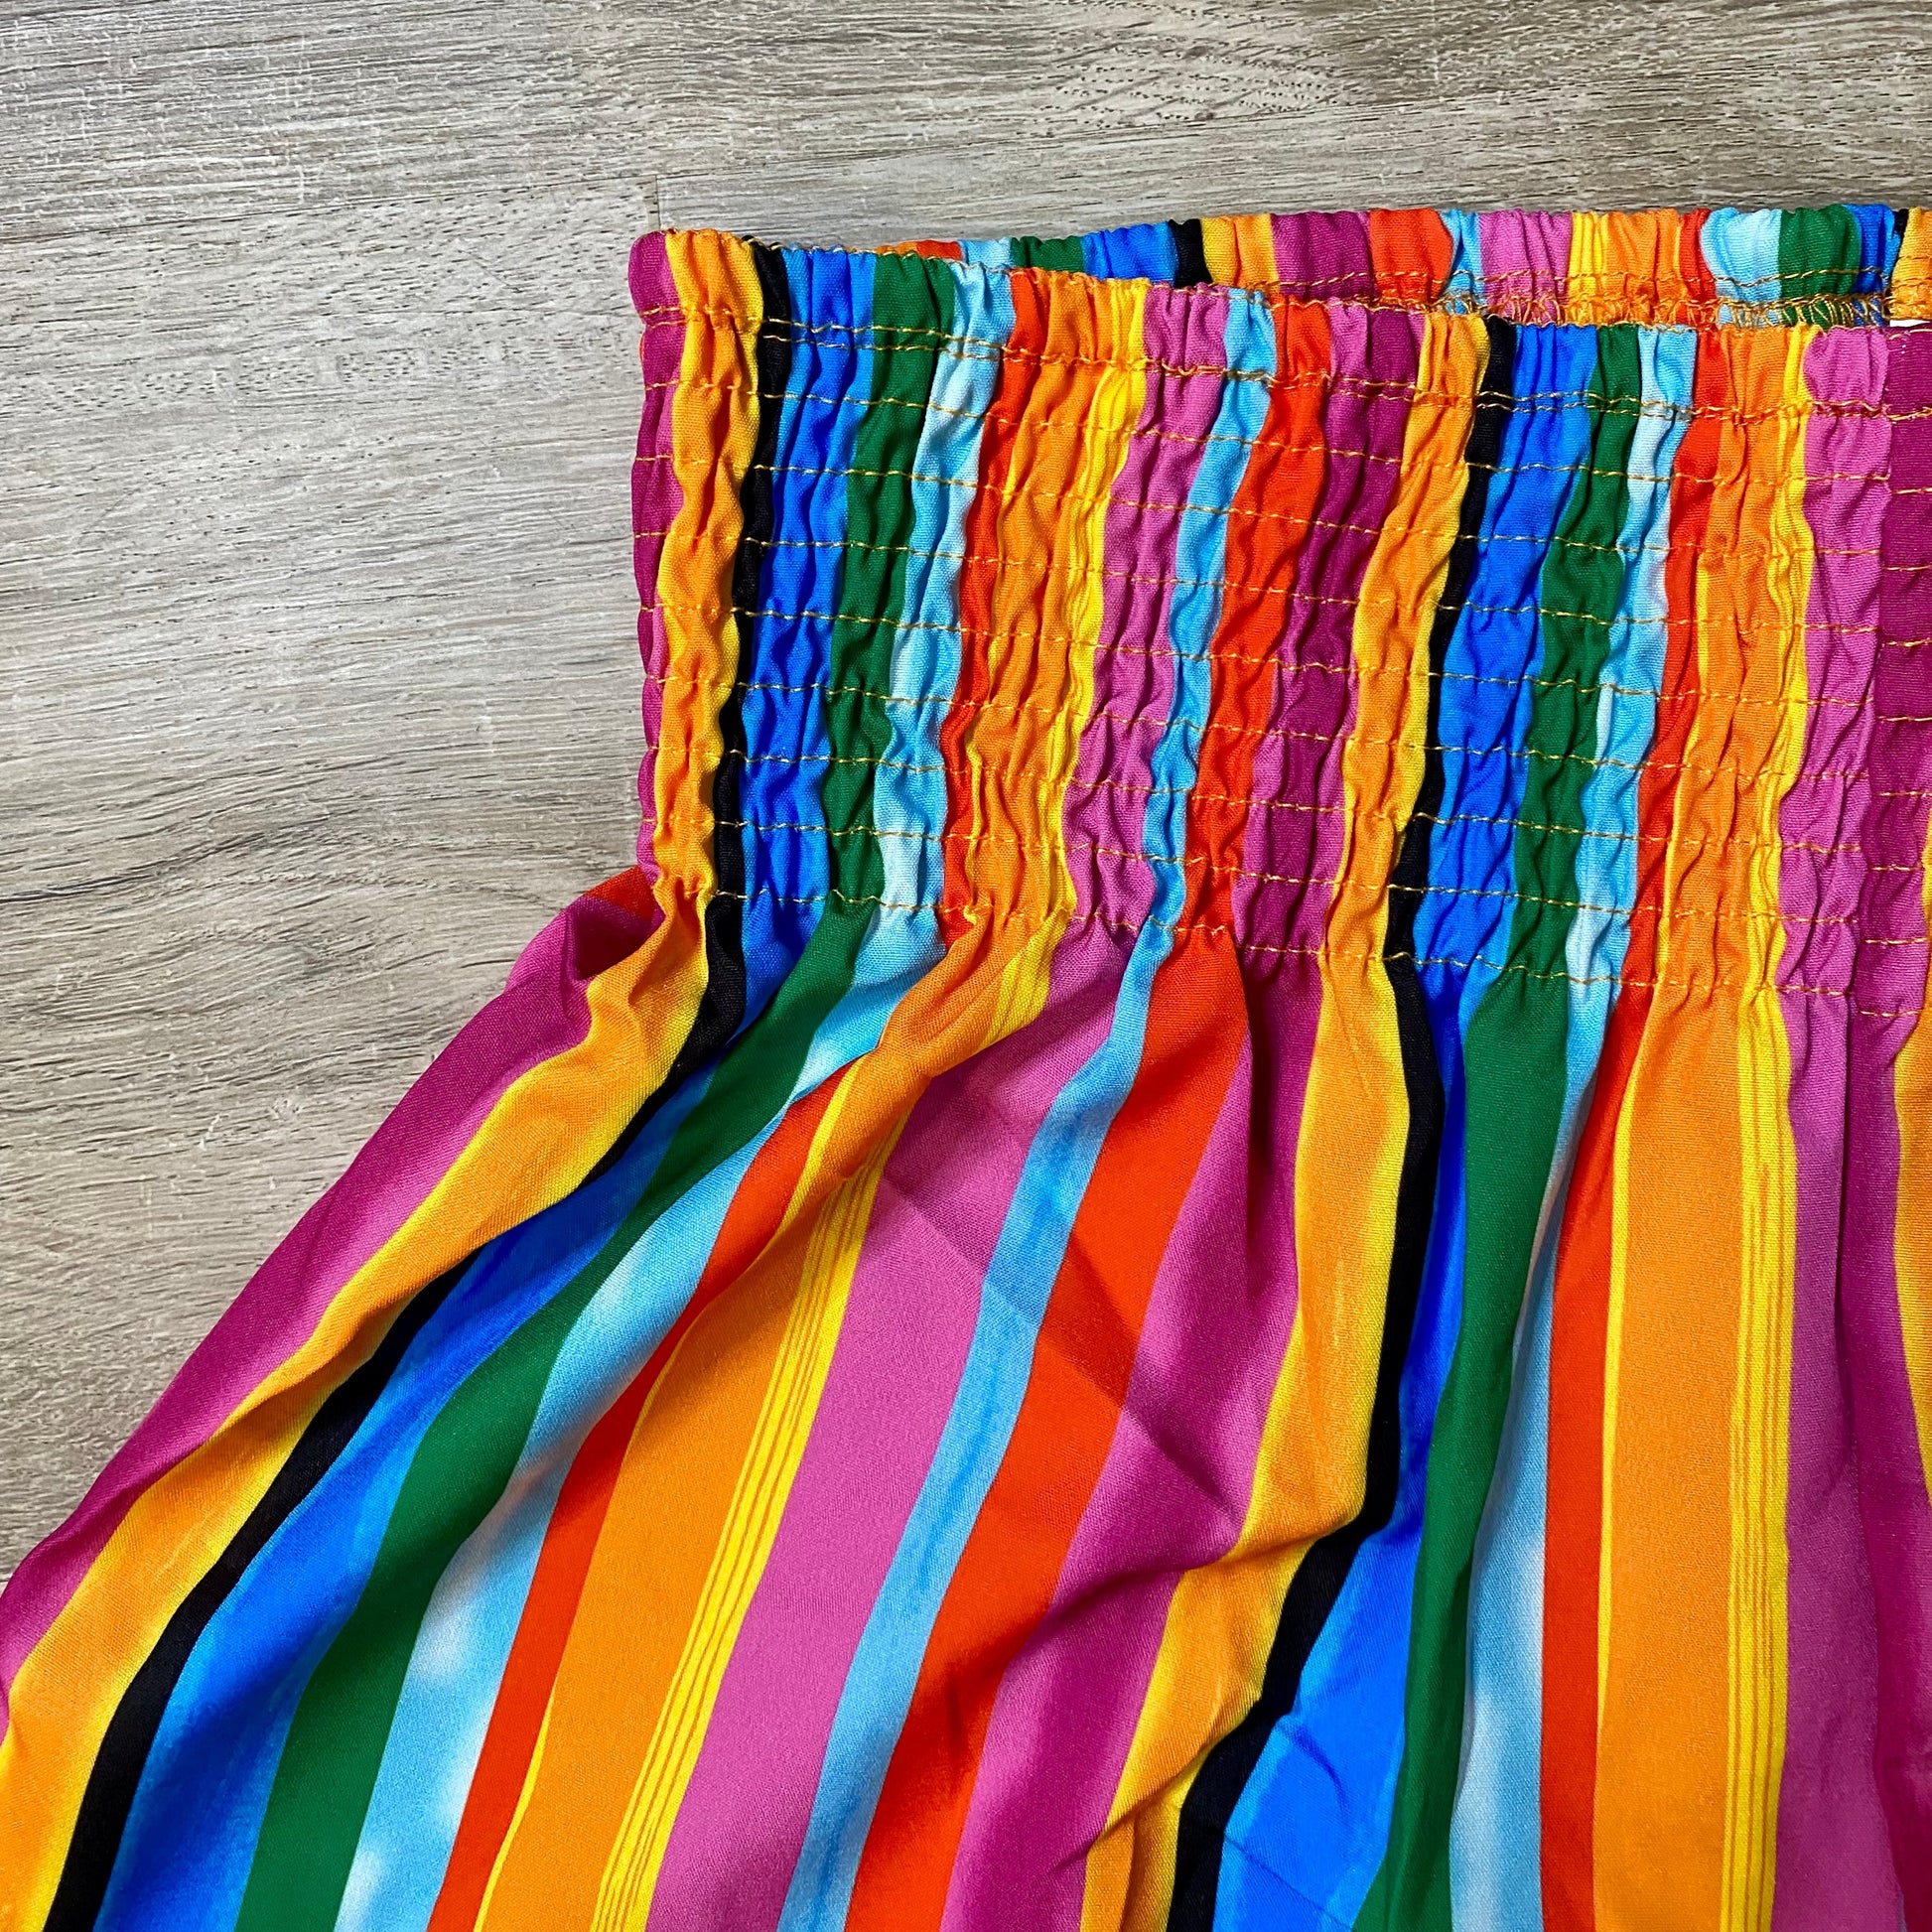 Fiesta Island shorts Description: Multicolor, Boho, Striped Shorts Wide Leg with Elastic Waist Shirred, High Waist, Cropped Loose with a Non-Stretch Material: Polyester 95% Polyester, 5% Elastane Care Instructions: Machine wash, tumble or air dry